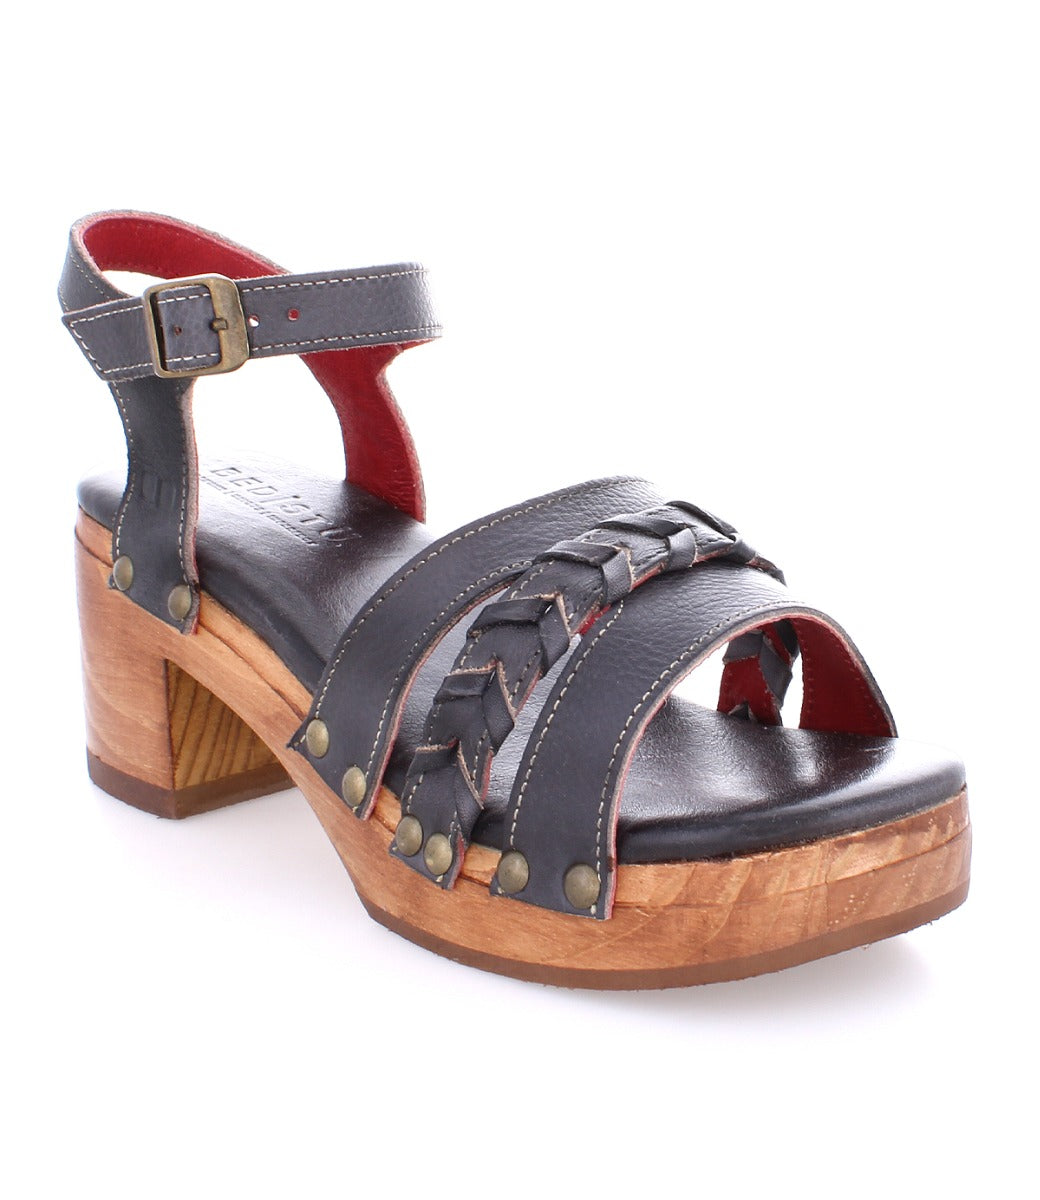 A women's black Mantis sandal with braided straps and wooden heel by Bed Stu.